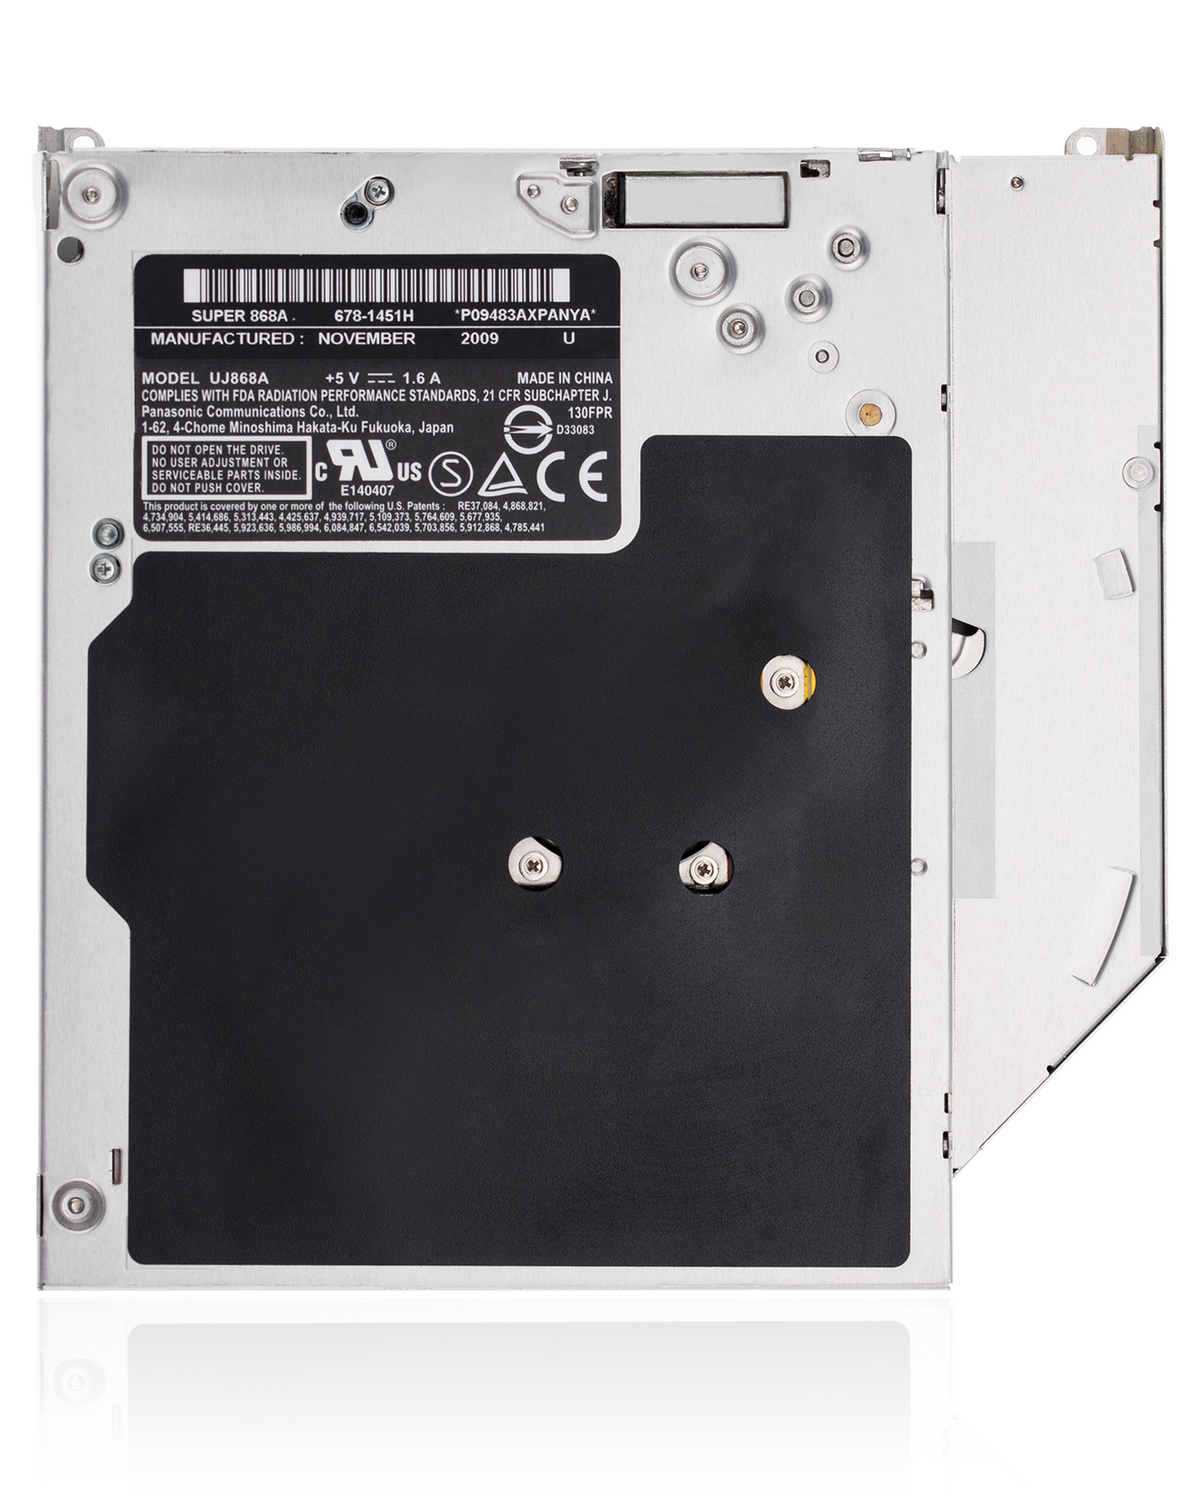 SUPERDRIVE (UJ-868)  FOR MACBOOK PRO UNIBODY 13"/15"/17" A1286 / A1278 / A1297 (MID 2009 / MID 2010 / EARLY 2011 / LATE 2011 / MID 2012)